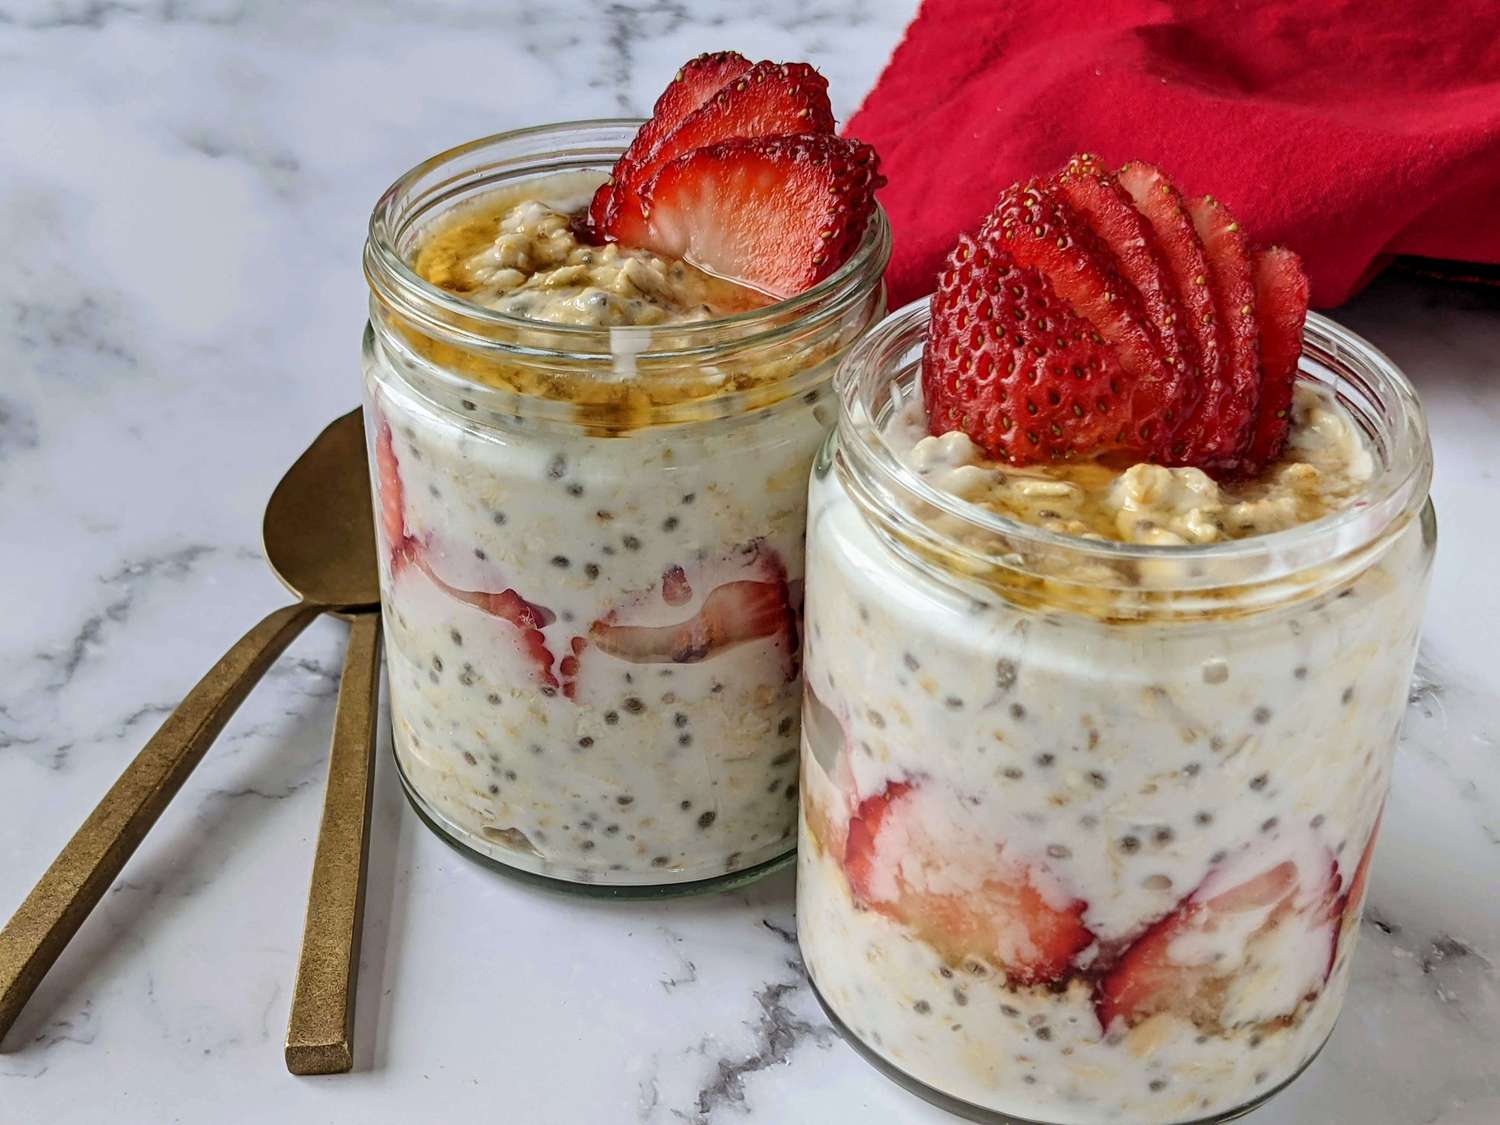 Overnight oats with chia and strawberries